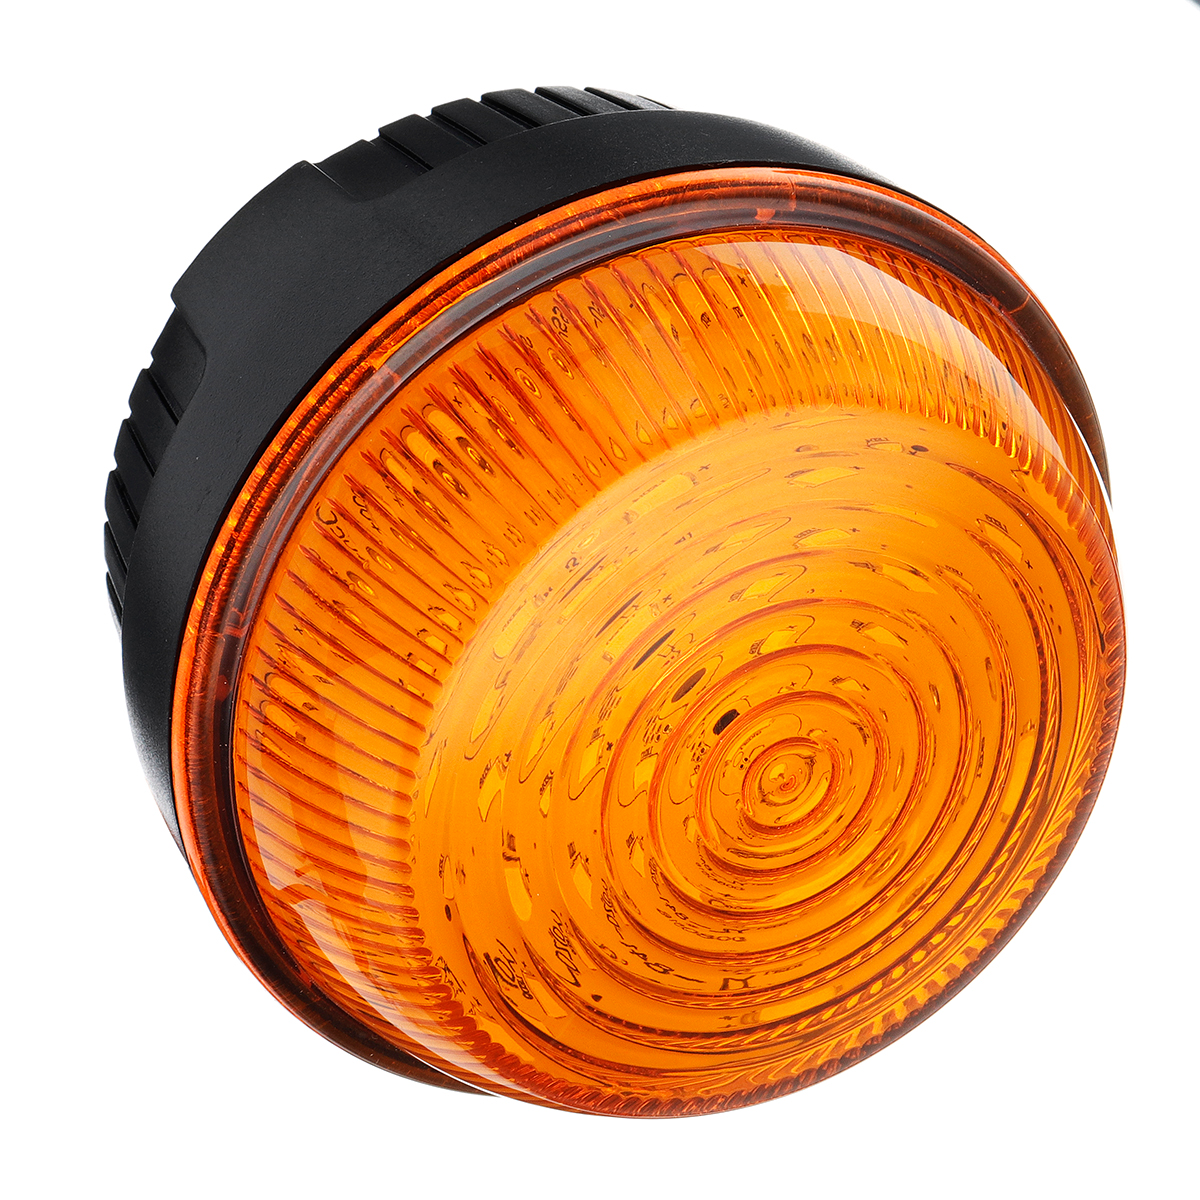 Round 20 LED Strobe Lights Emergency Warning Flashing Beacon Lamp Blue/Yellow DC 10-110V for Truck Tractor Agricultural Vehicle